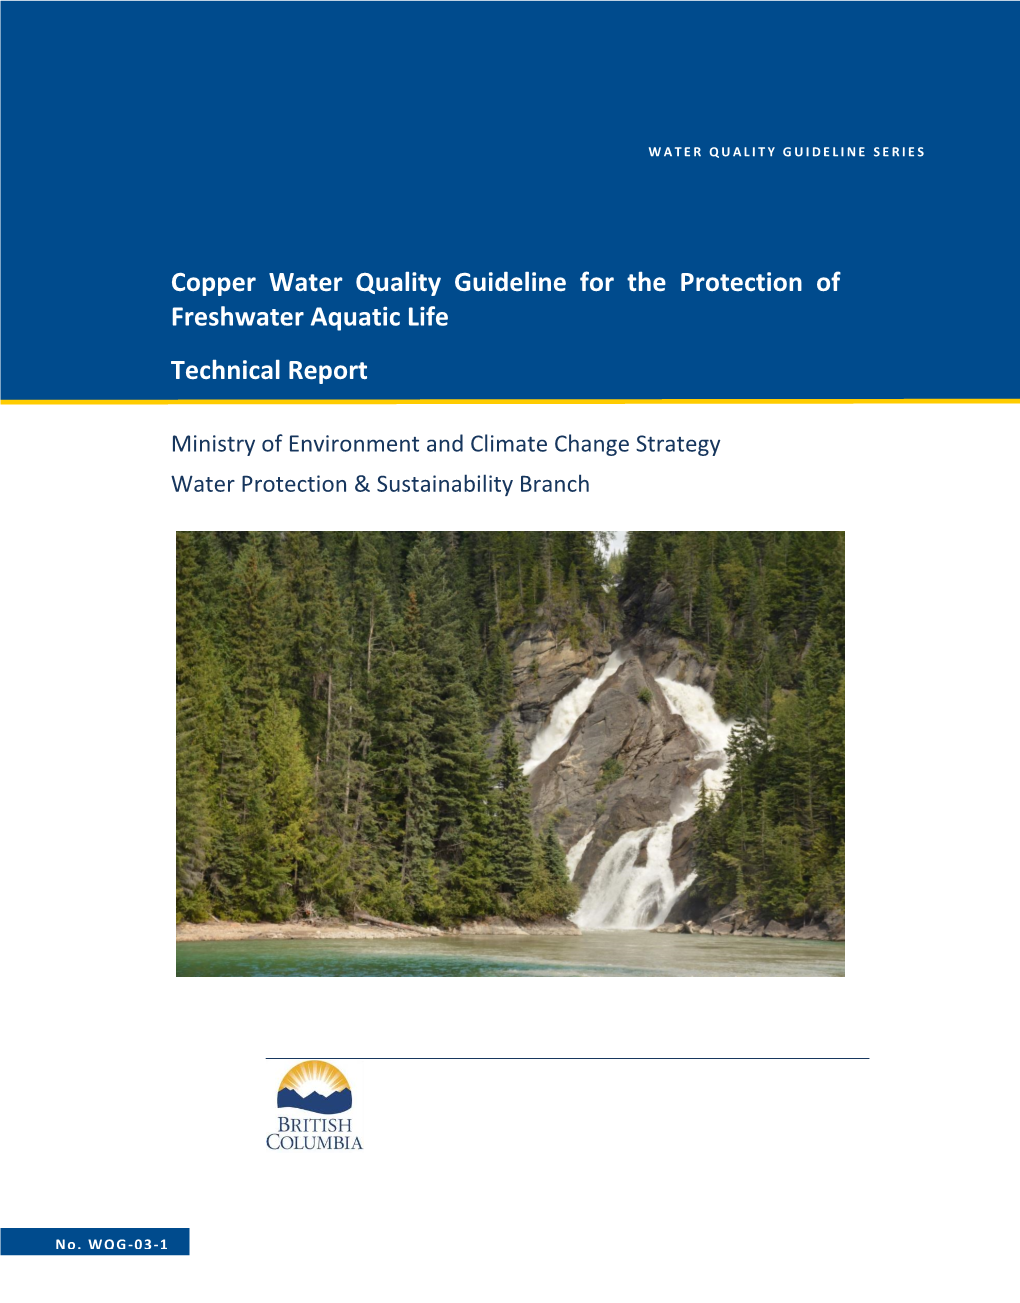 Copper Water Quality Guideline for the Protection of Freshwater Aquatic Life Technical Report